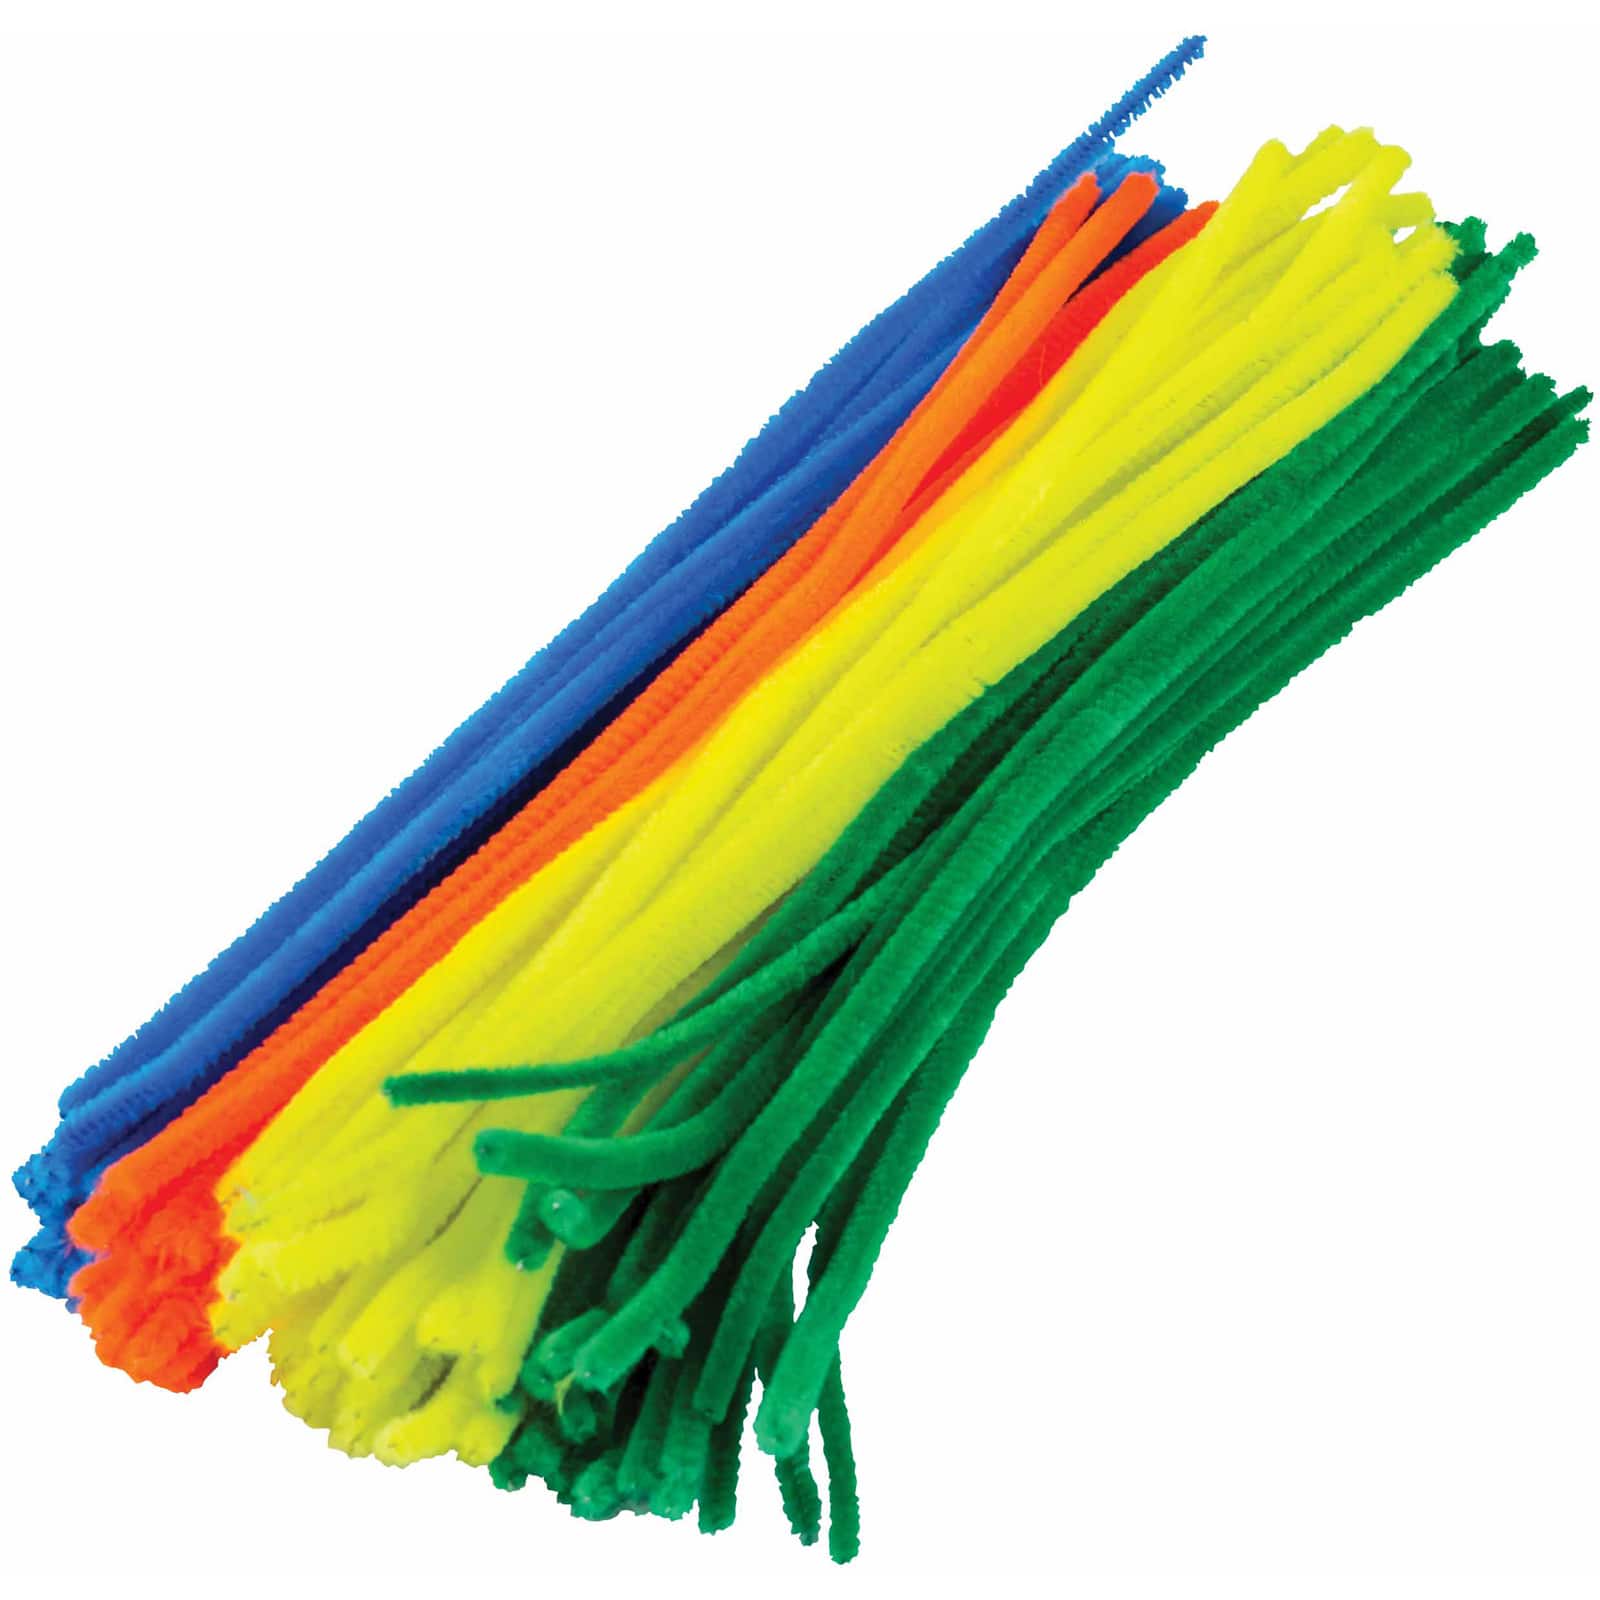 6 Packs: 6 Packs 100 ct. (3,600 total) Teacher Created Resources STEM Basics Chenille Pipe Cleaners